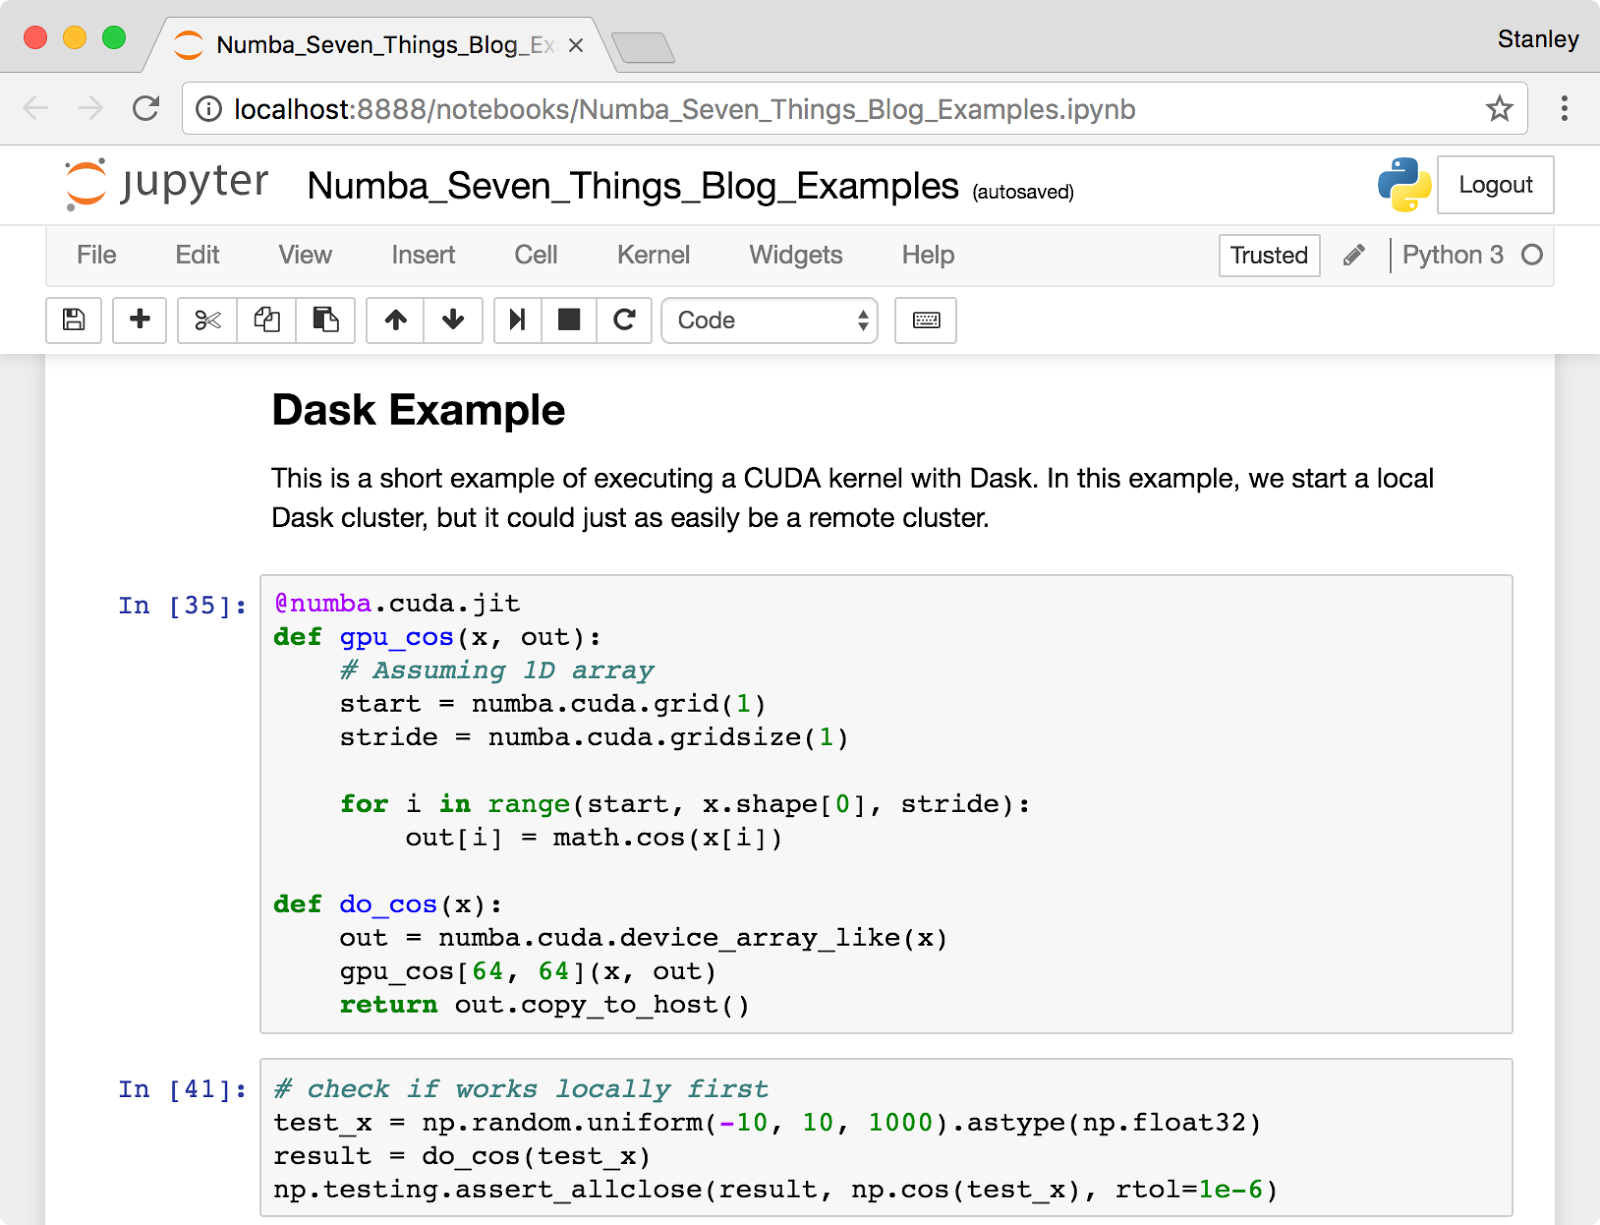 Screenshot of the Jupyter Notebook used in this post showing some CUDA Python code.